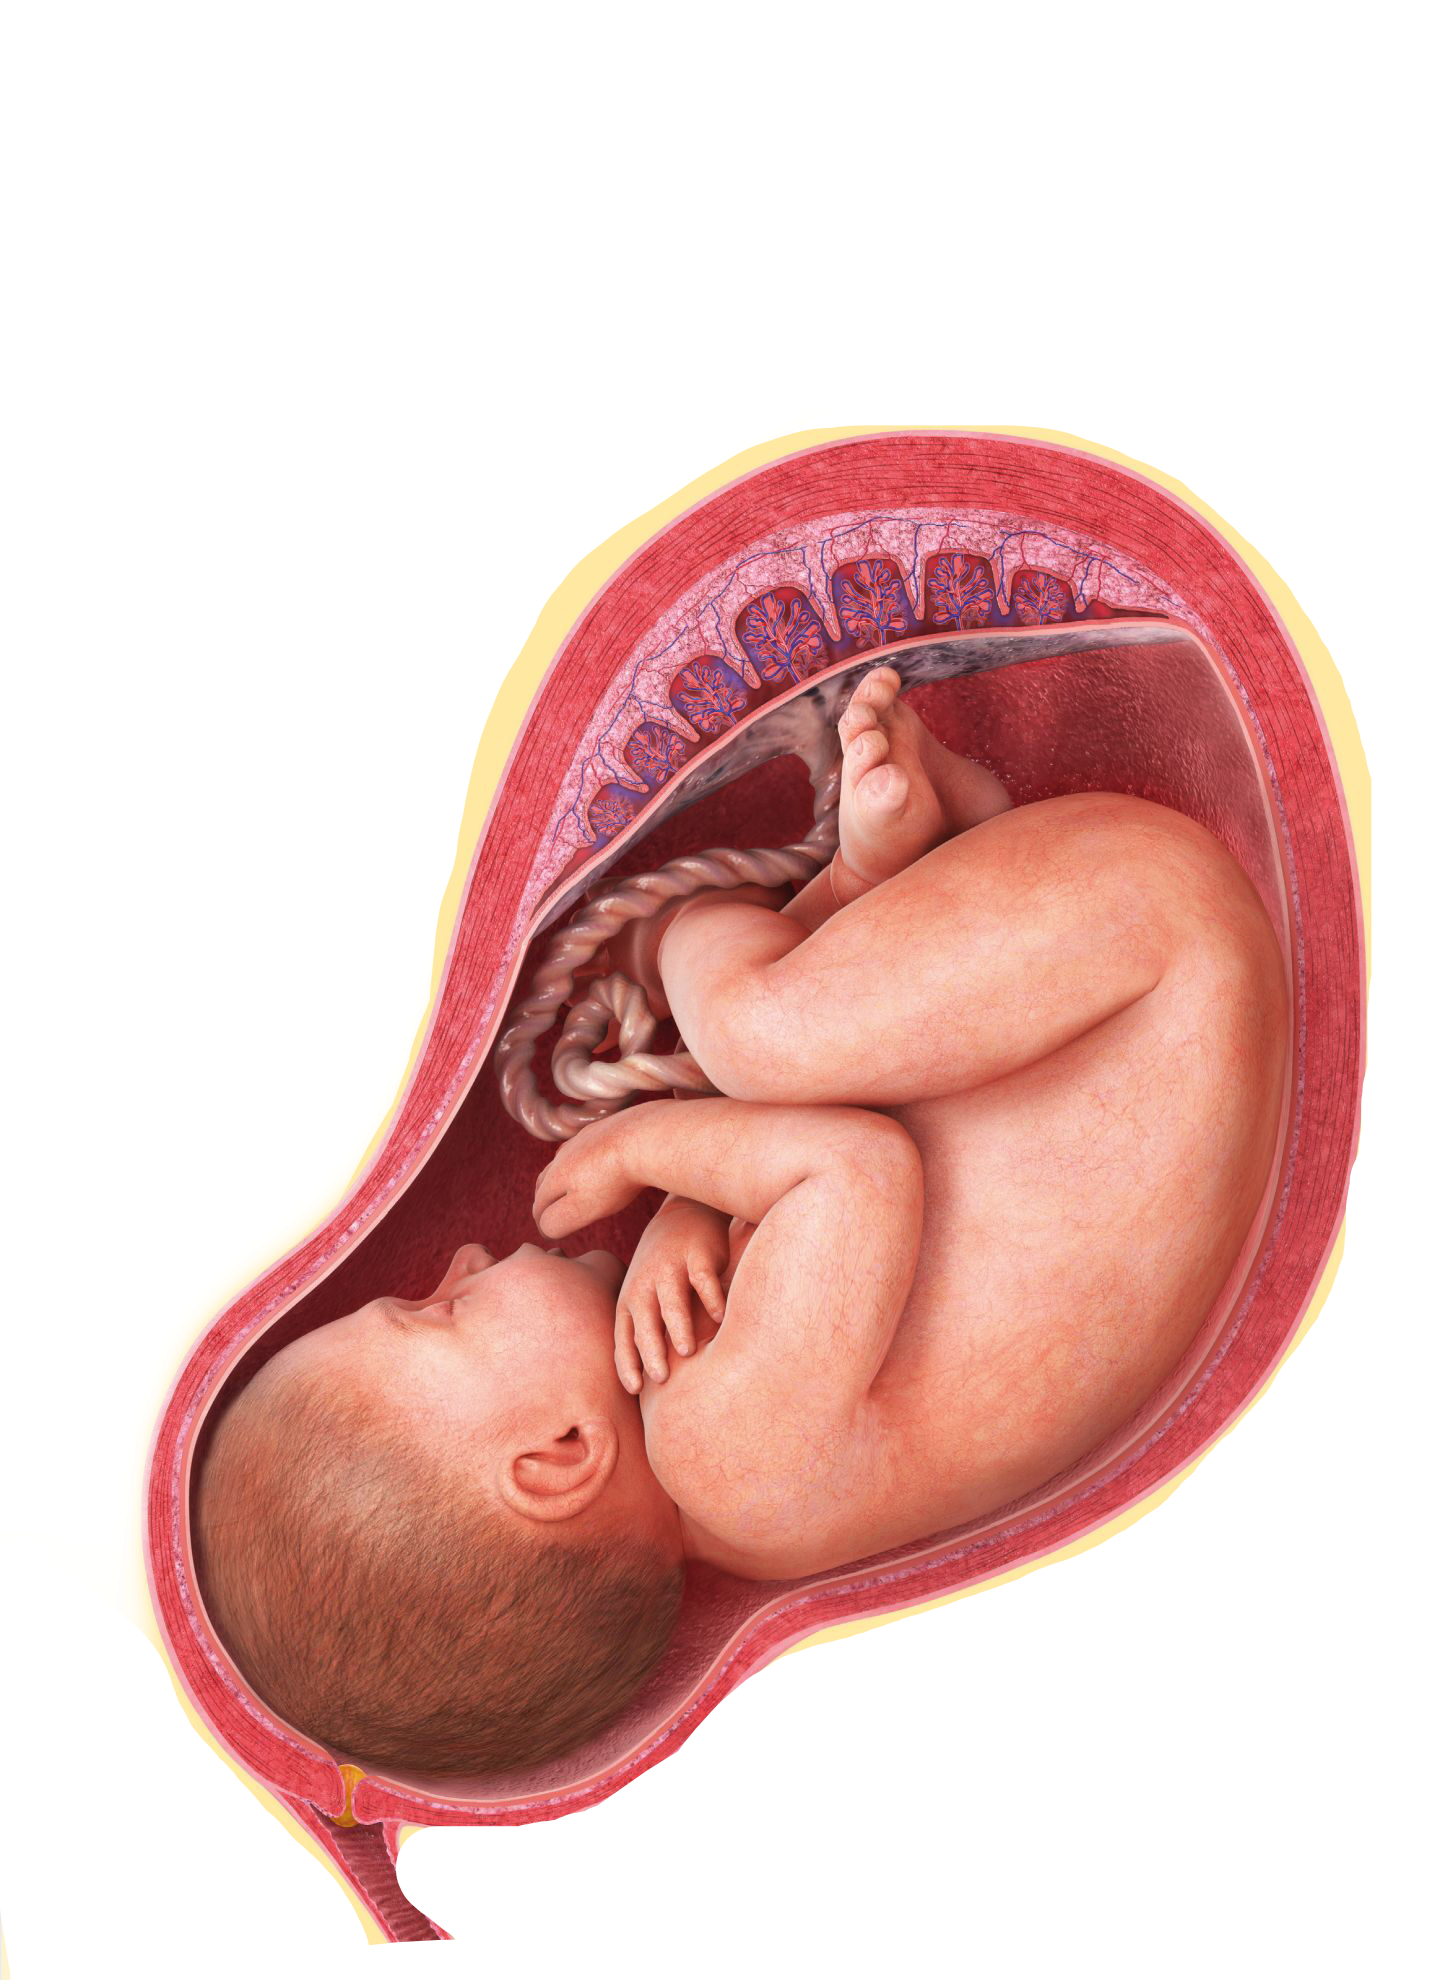 A Baby In A Womb